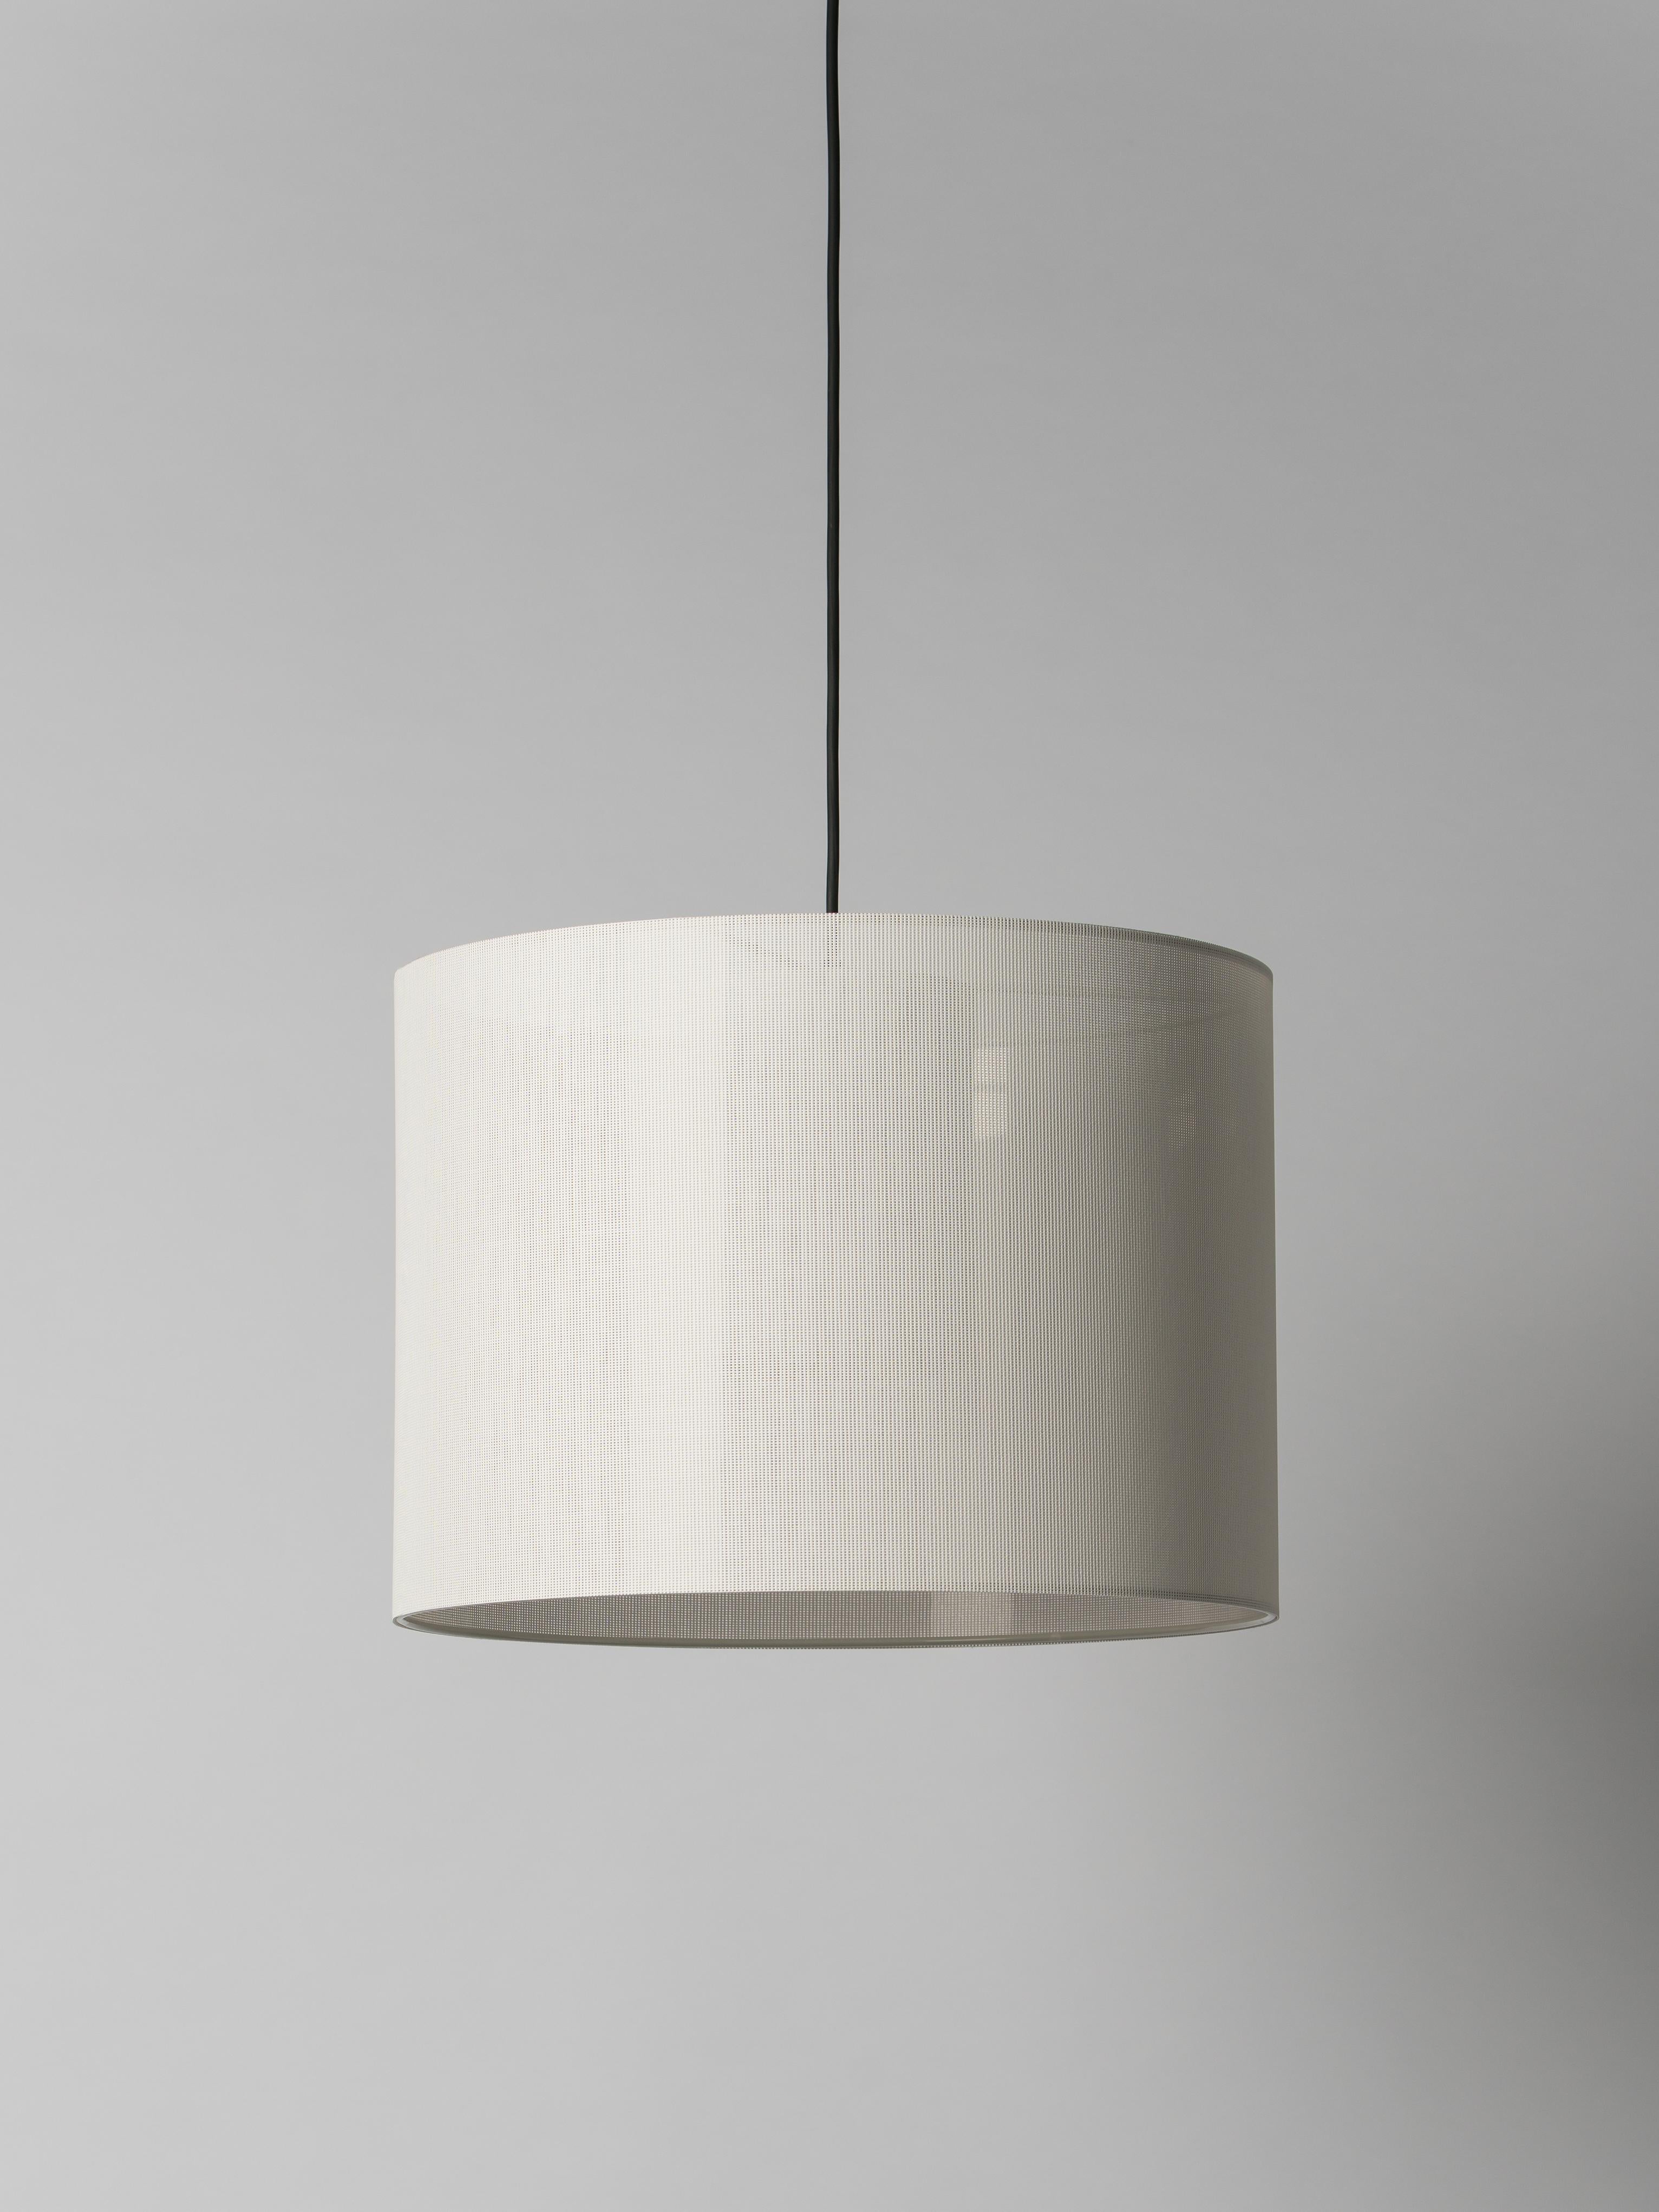 Moaré liviana M pendant lamp by Antoni Arola
Dimensions: D 46 x H 34 cm
Materials: Metal, polyester.
Available in other size and in black or white cable.
Available in satin nickel, white or black canopy color.

Moaré Liviana owes its name to